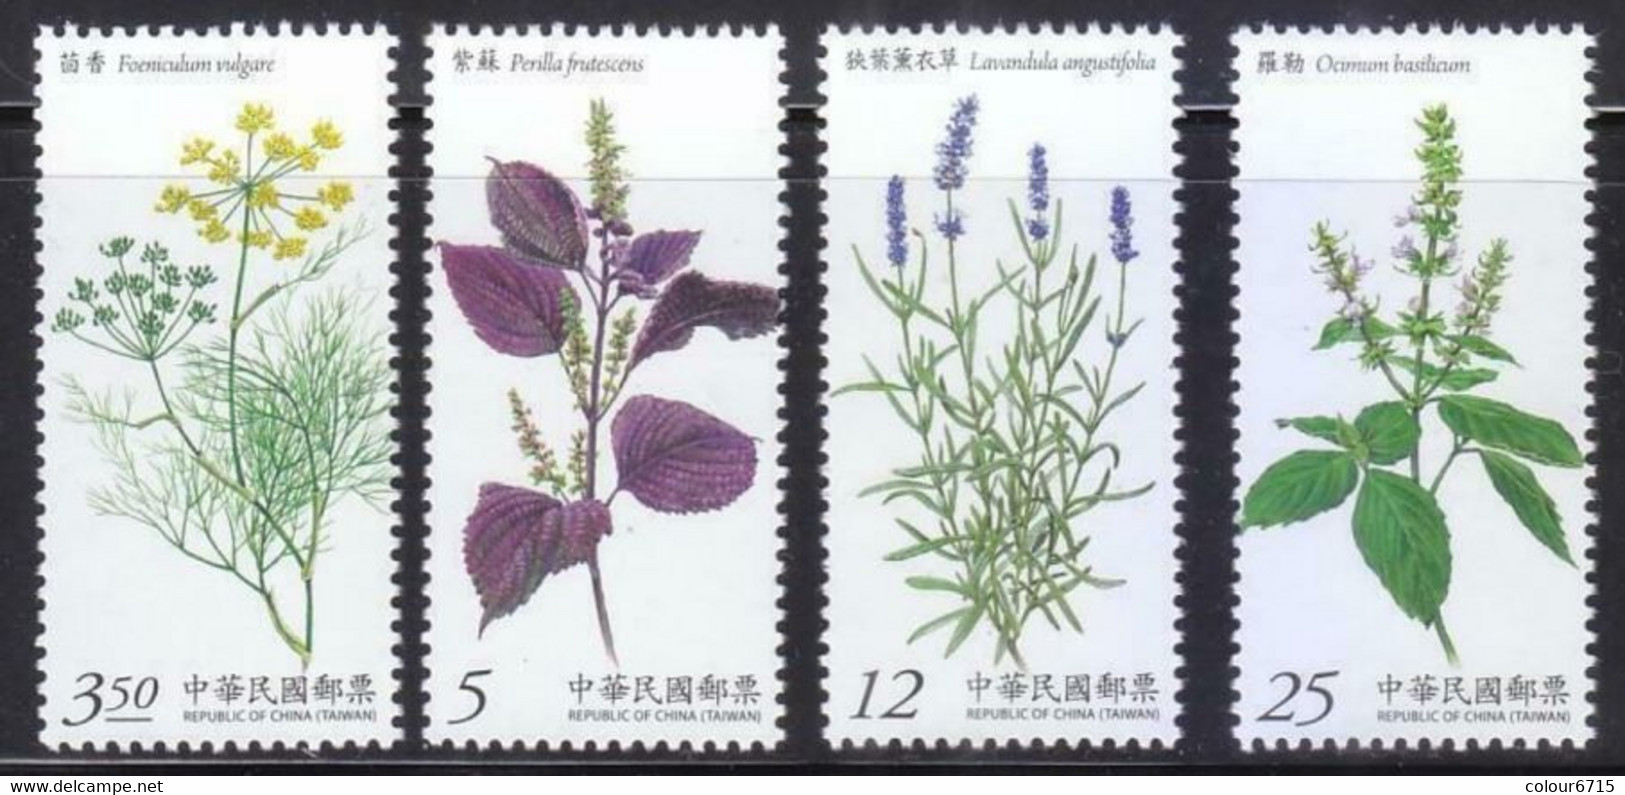 China Taiwan 2014 Herb Plants Postage Stamps  4v MNH - Unused Stamps